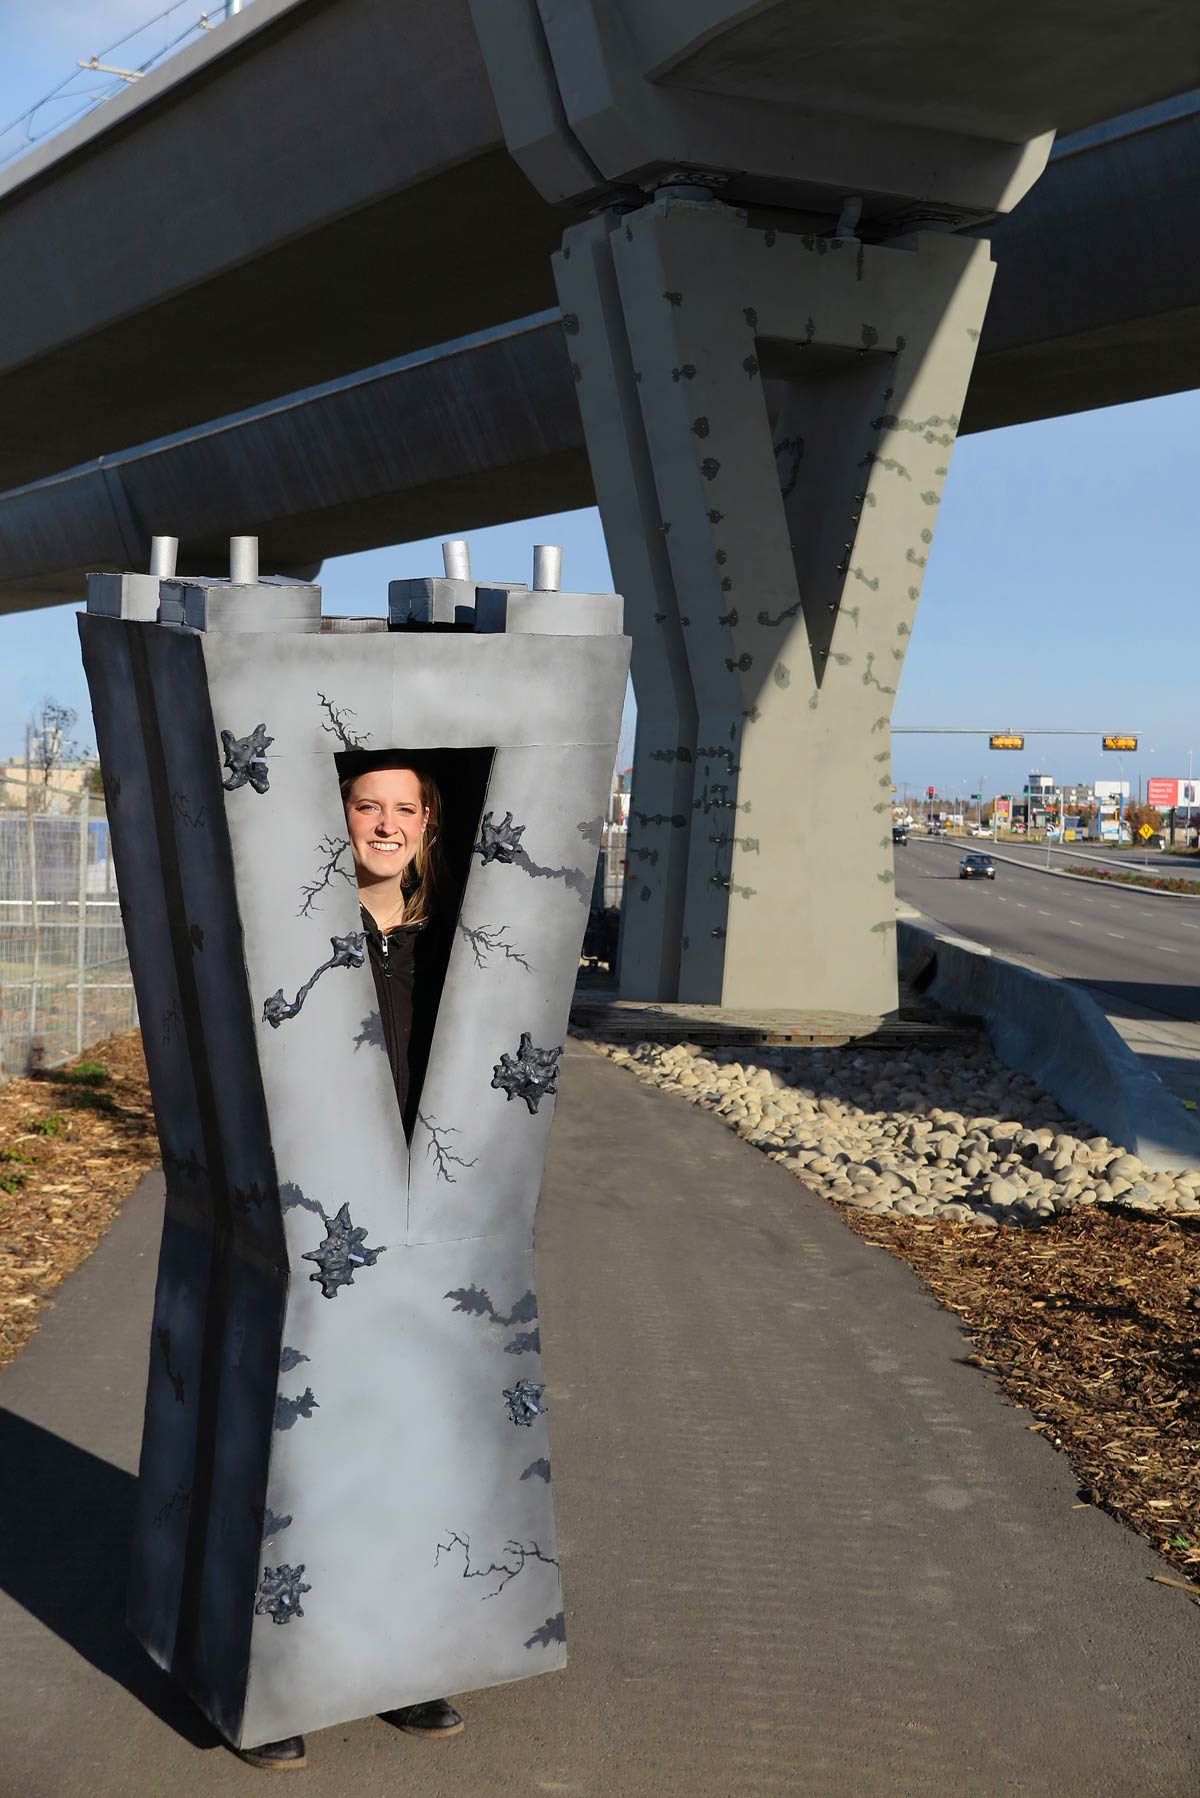 City builds multi-million dollar concrete pillars, they crack after 6 Months. Woman dresses up as one for Halloween. She Writes, "Just wanted to show my... "SUPPORT"!"